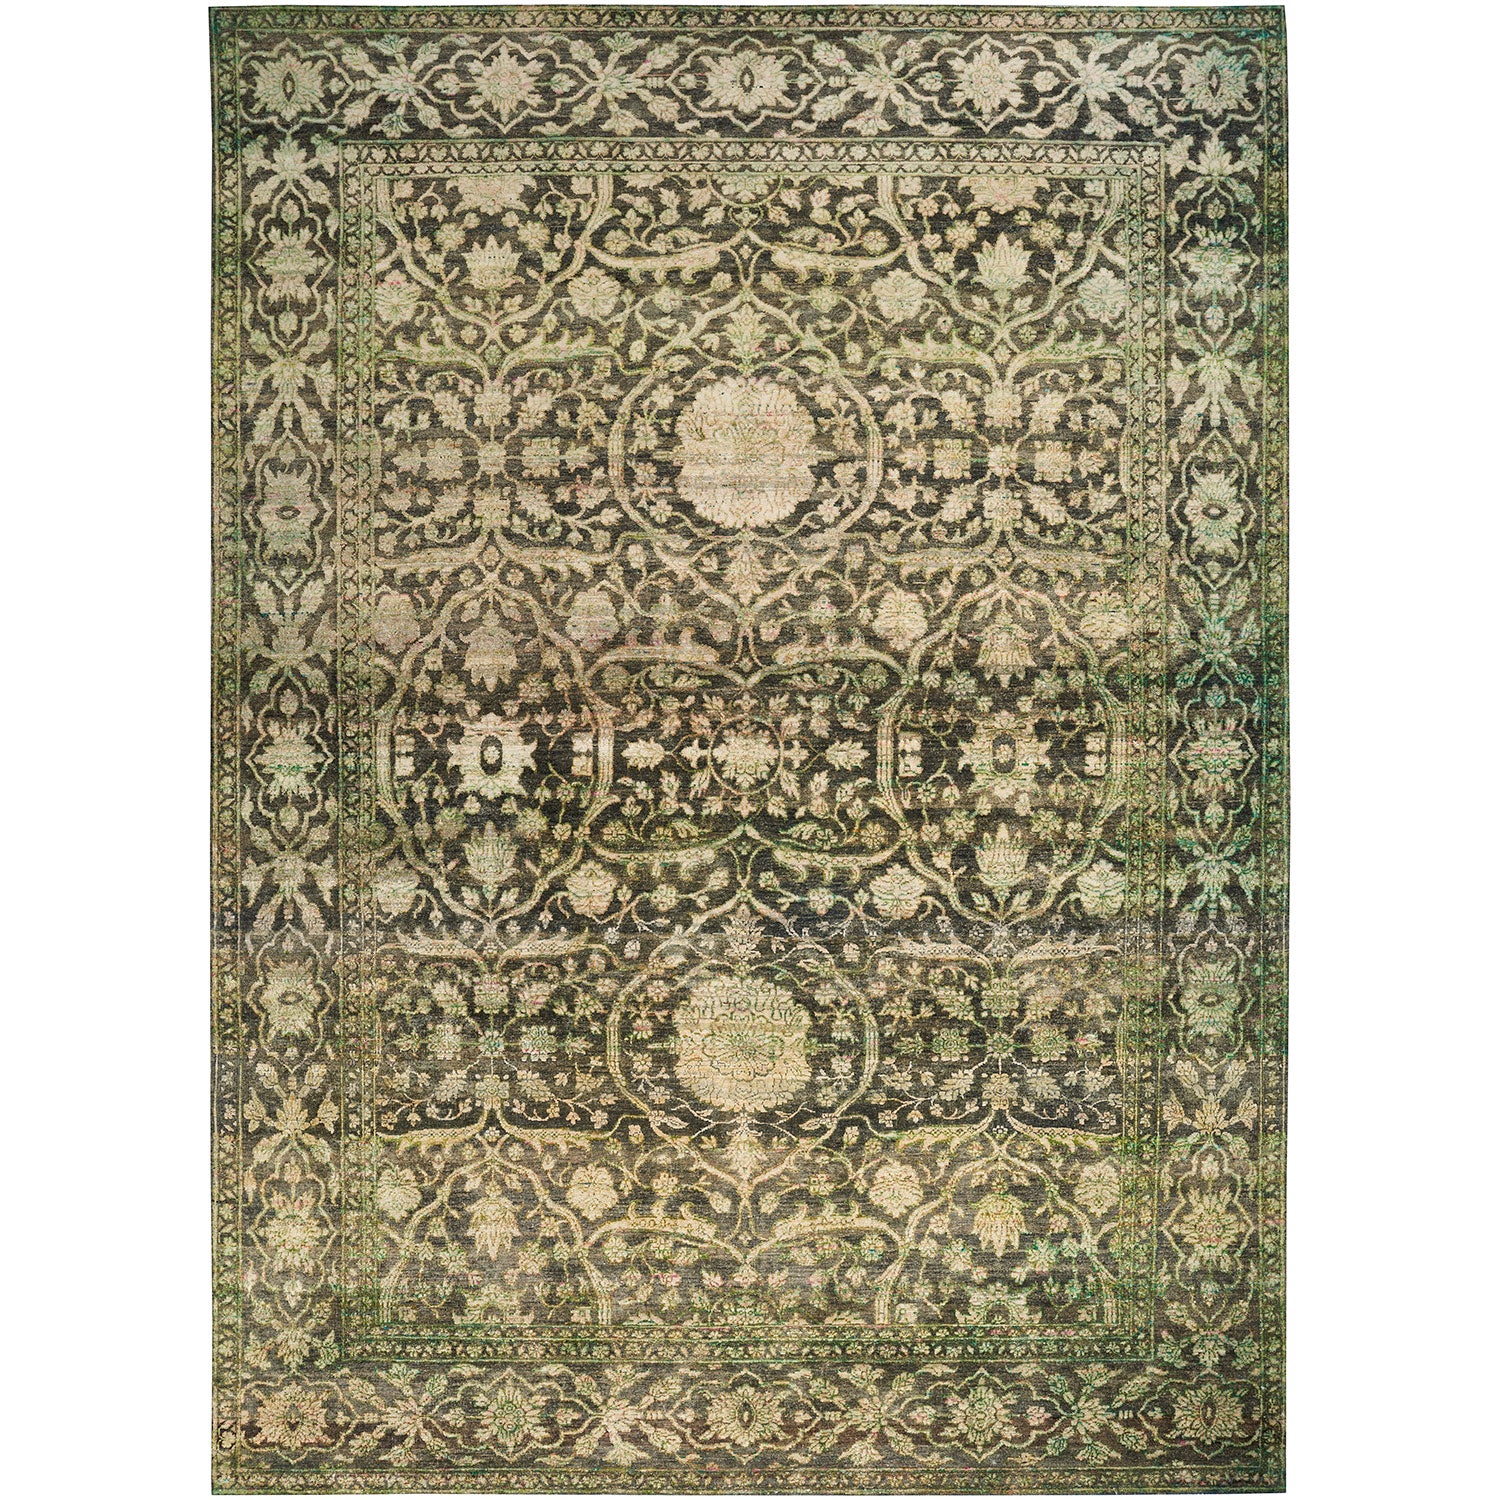 Exquisite Persian-inspired rug showcases intricate floral motifs and elaborate borders.